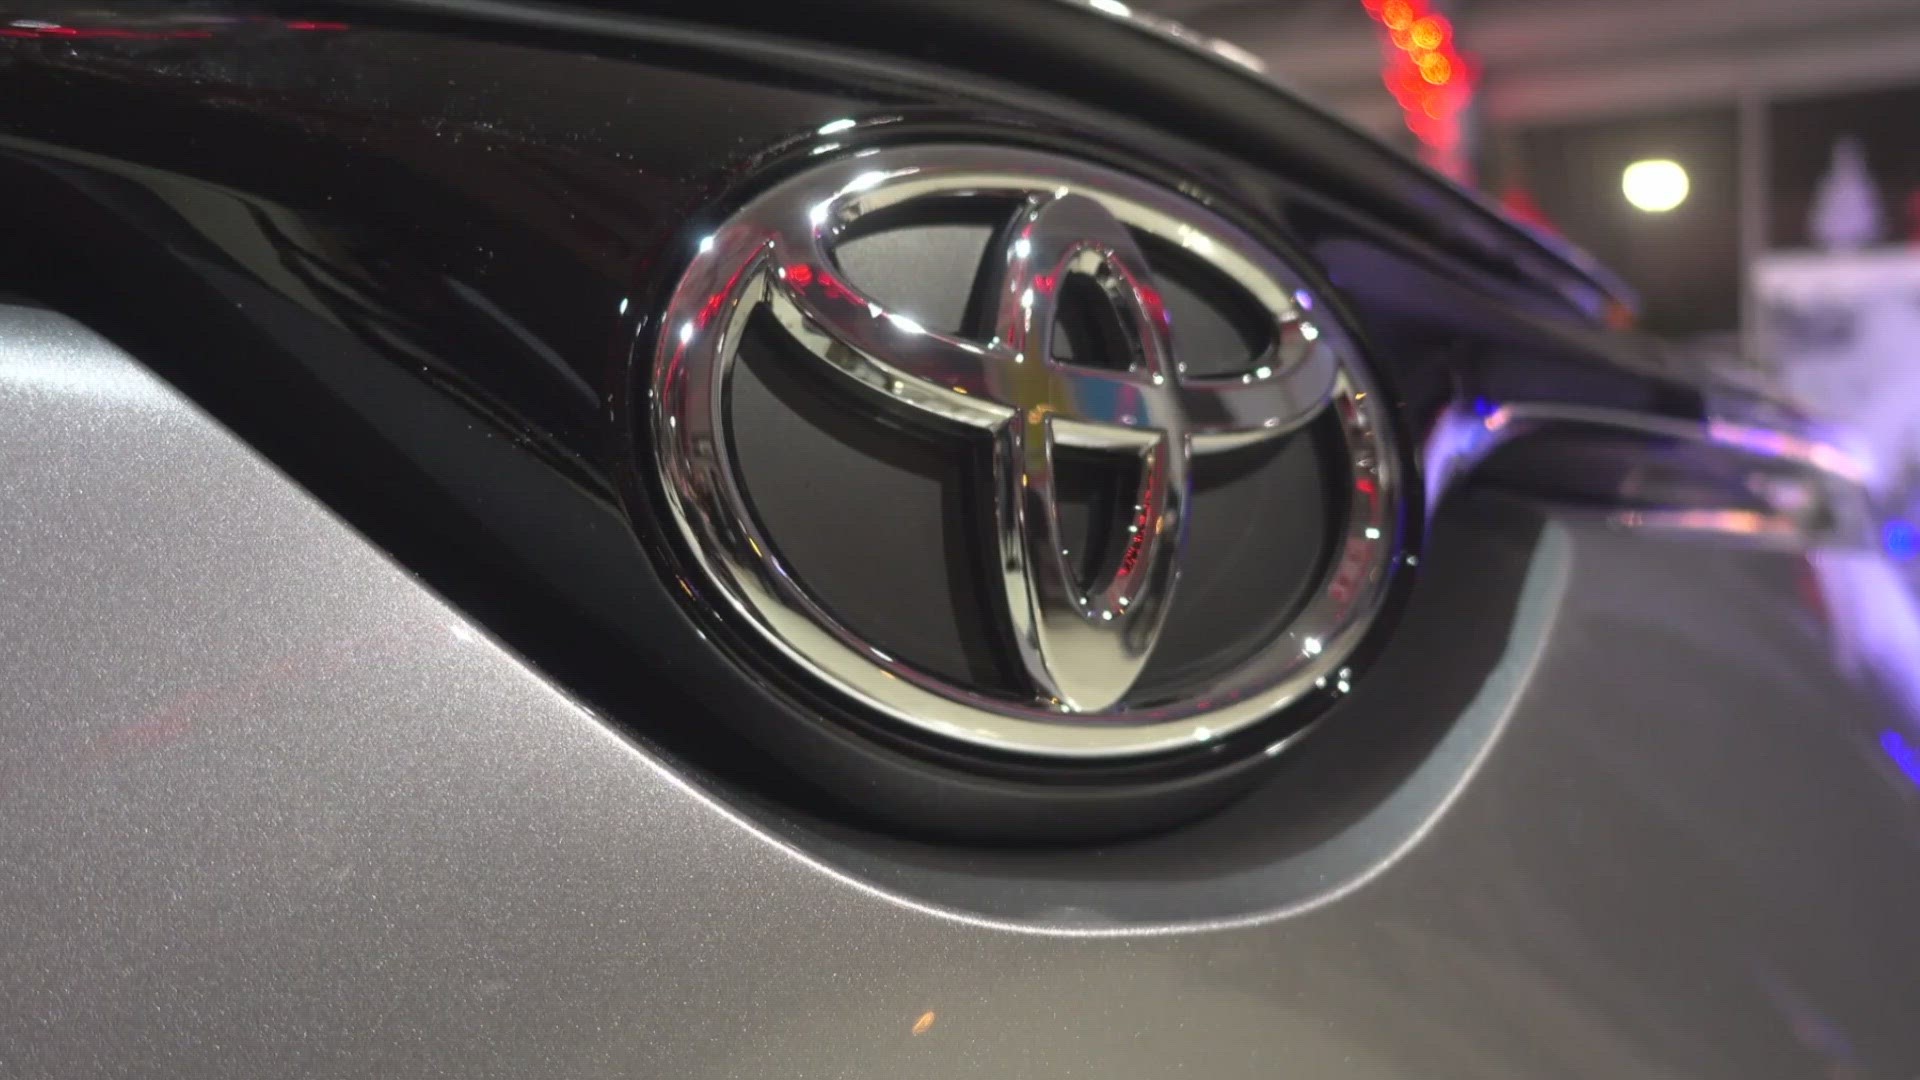 Toyota Motor Corporation is recalling close to 700,000 vehicles in the U.S. Chandra Lanier has the story.